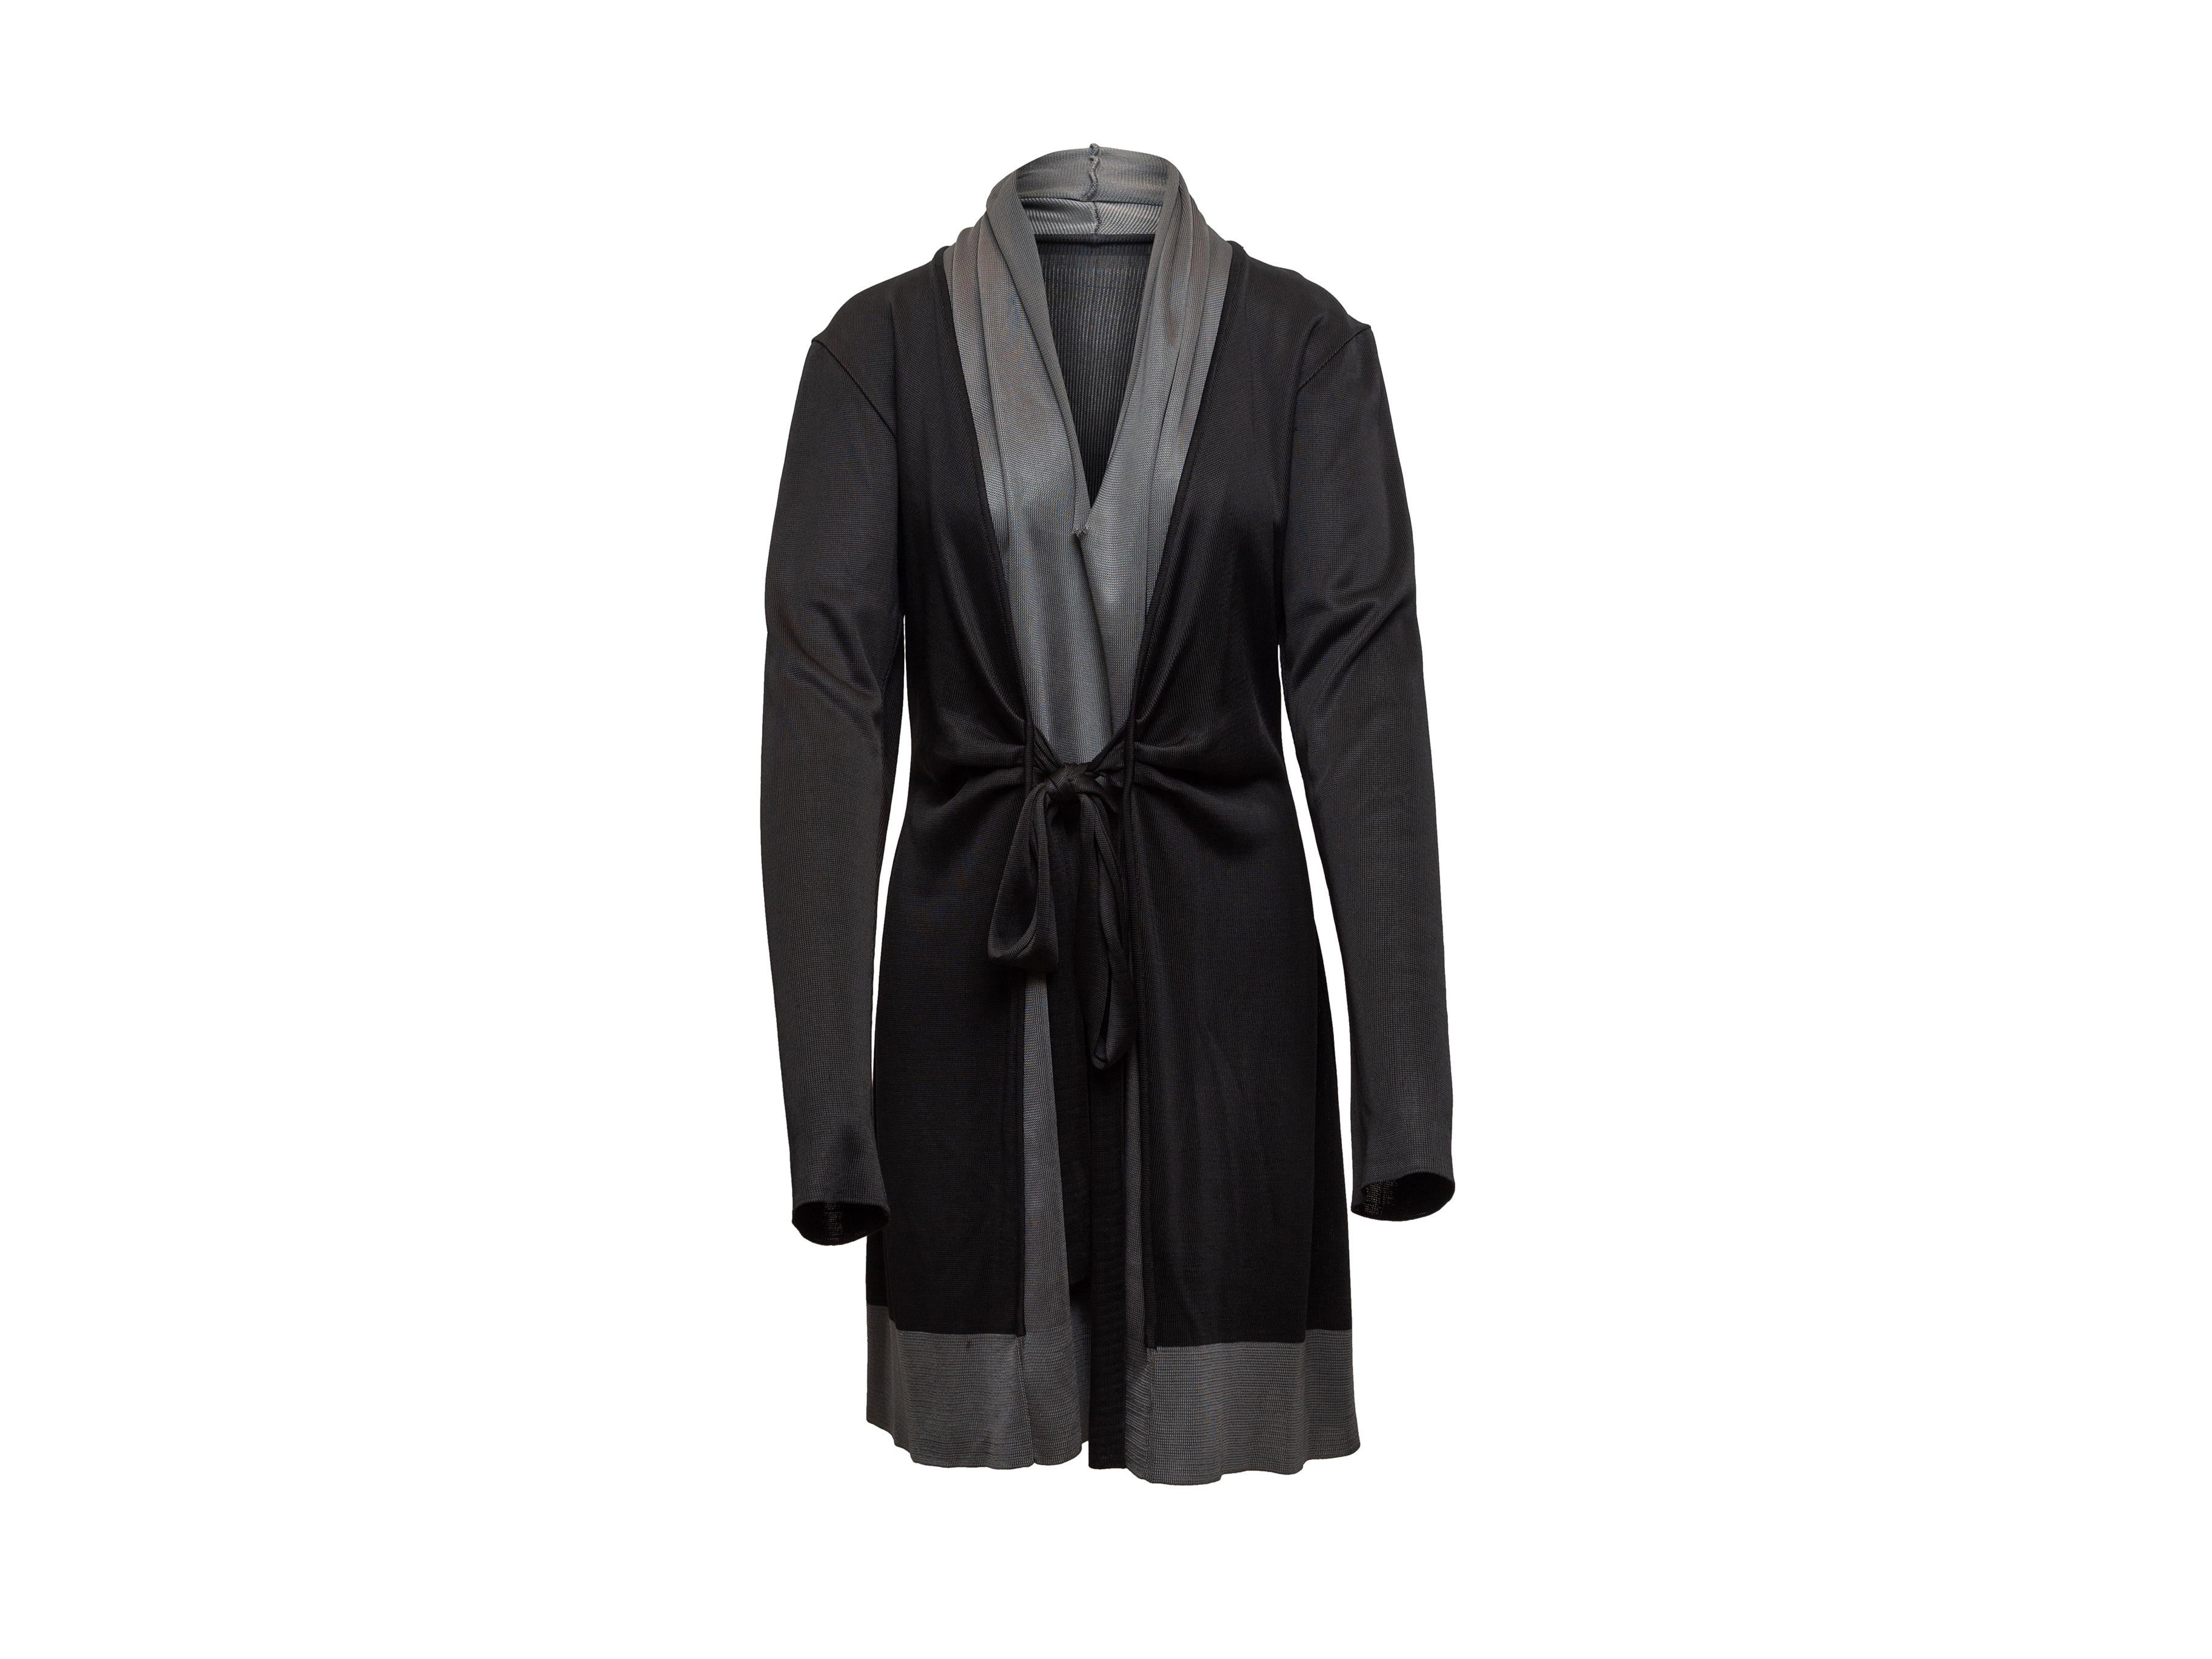 Product details: Black and grey long sleeve wrap dress by Balenciaga. Sash tie closure at front. Designer size 40. 68